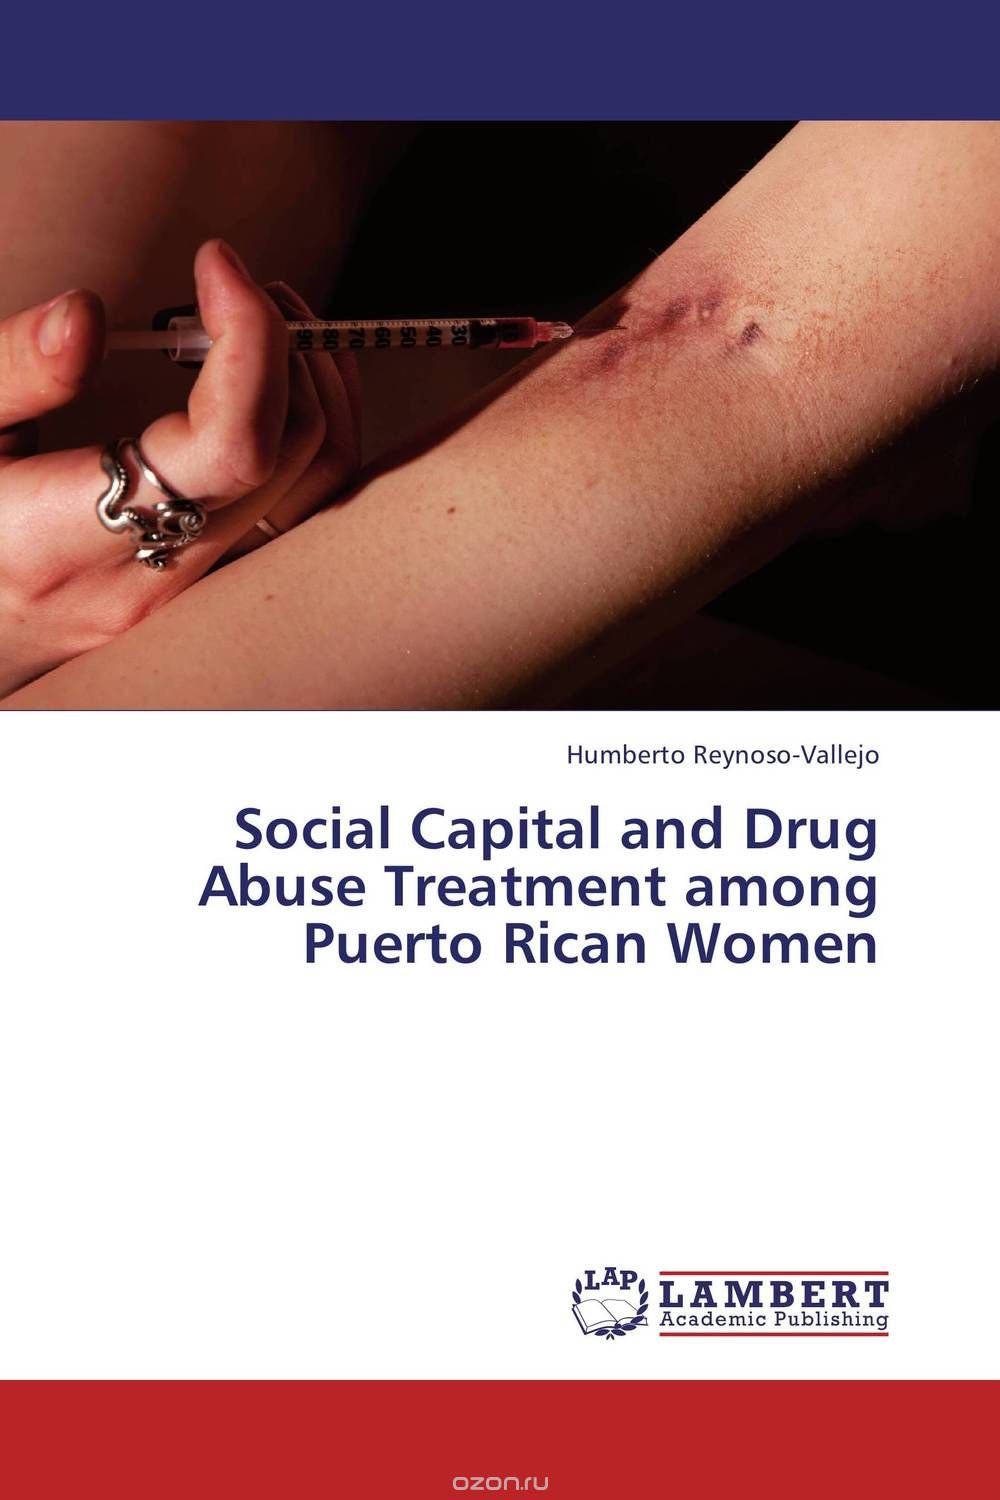 Social Capital and Drug Abuse Treatment among Puerto Rican Women